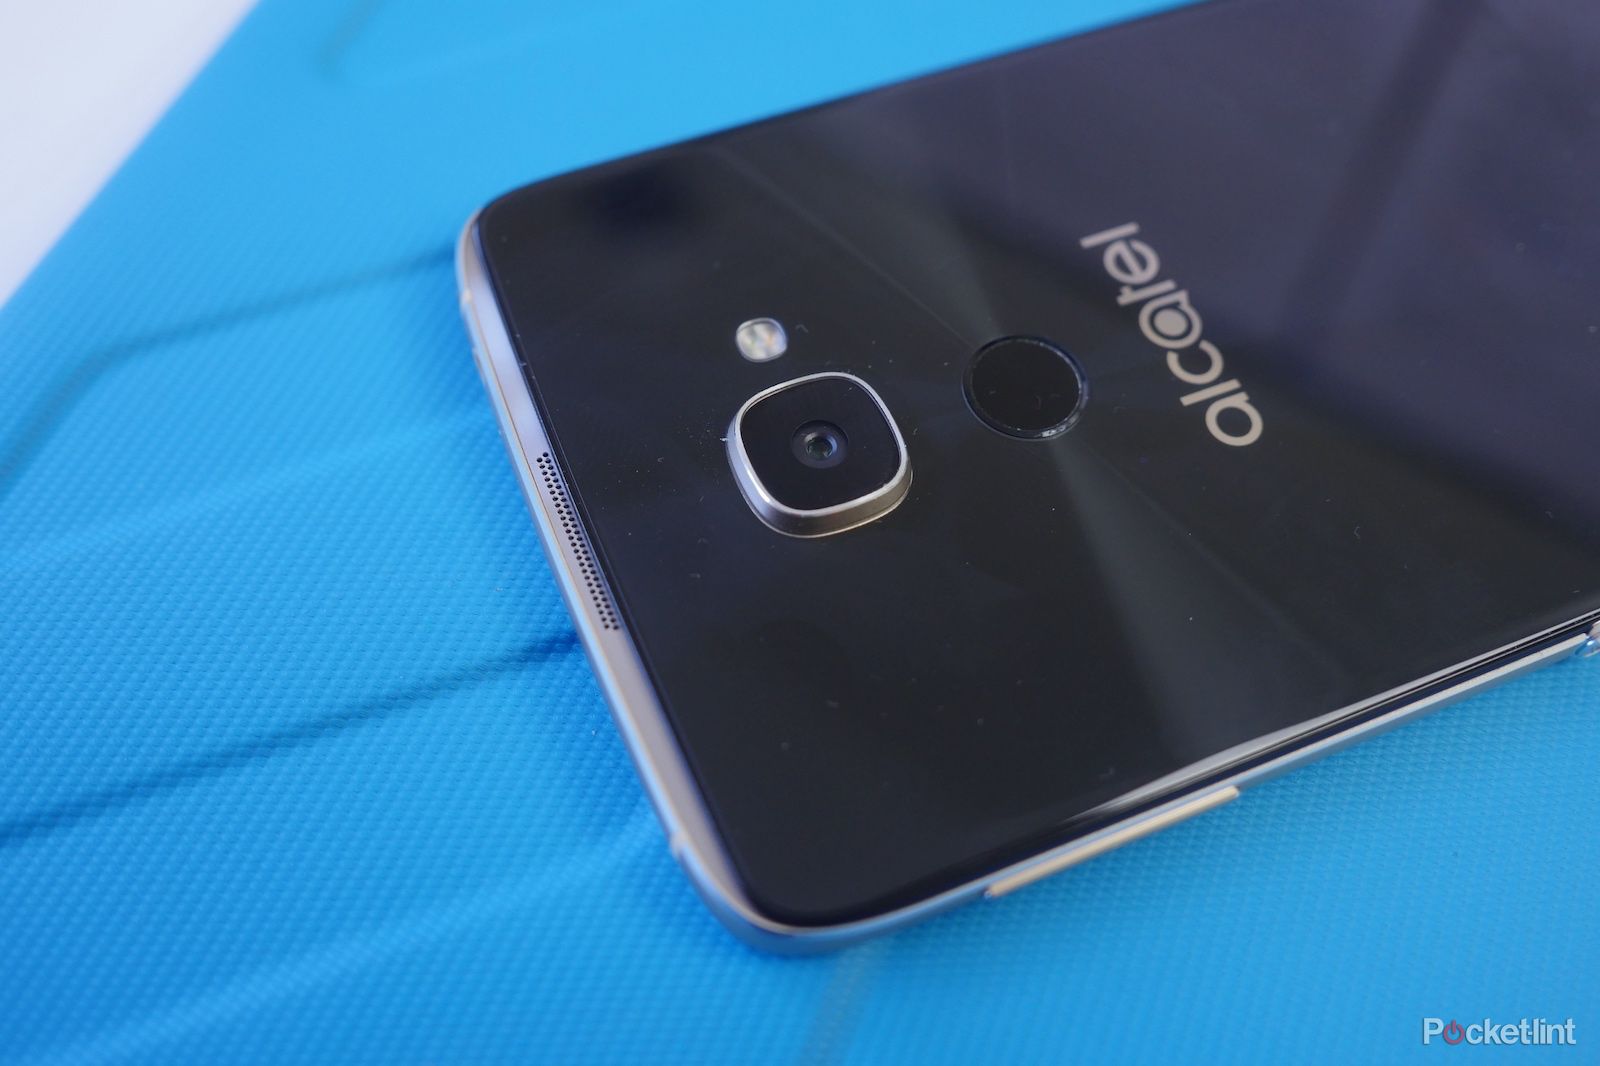 alcatel idol 4s with windows 10 review image 5